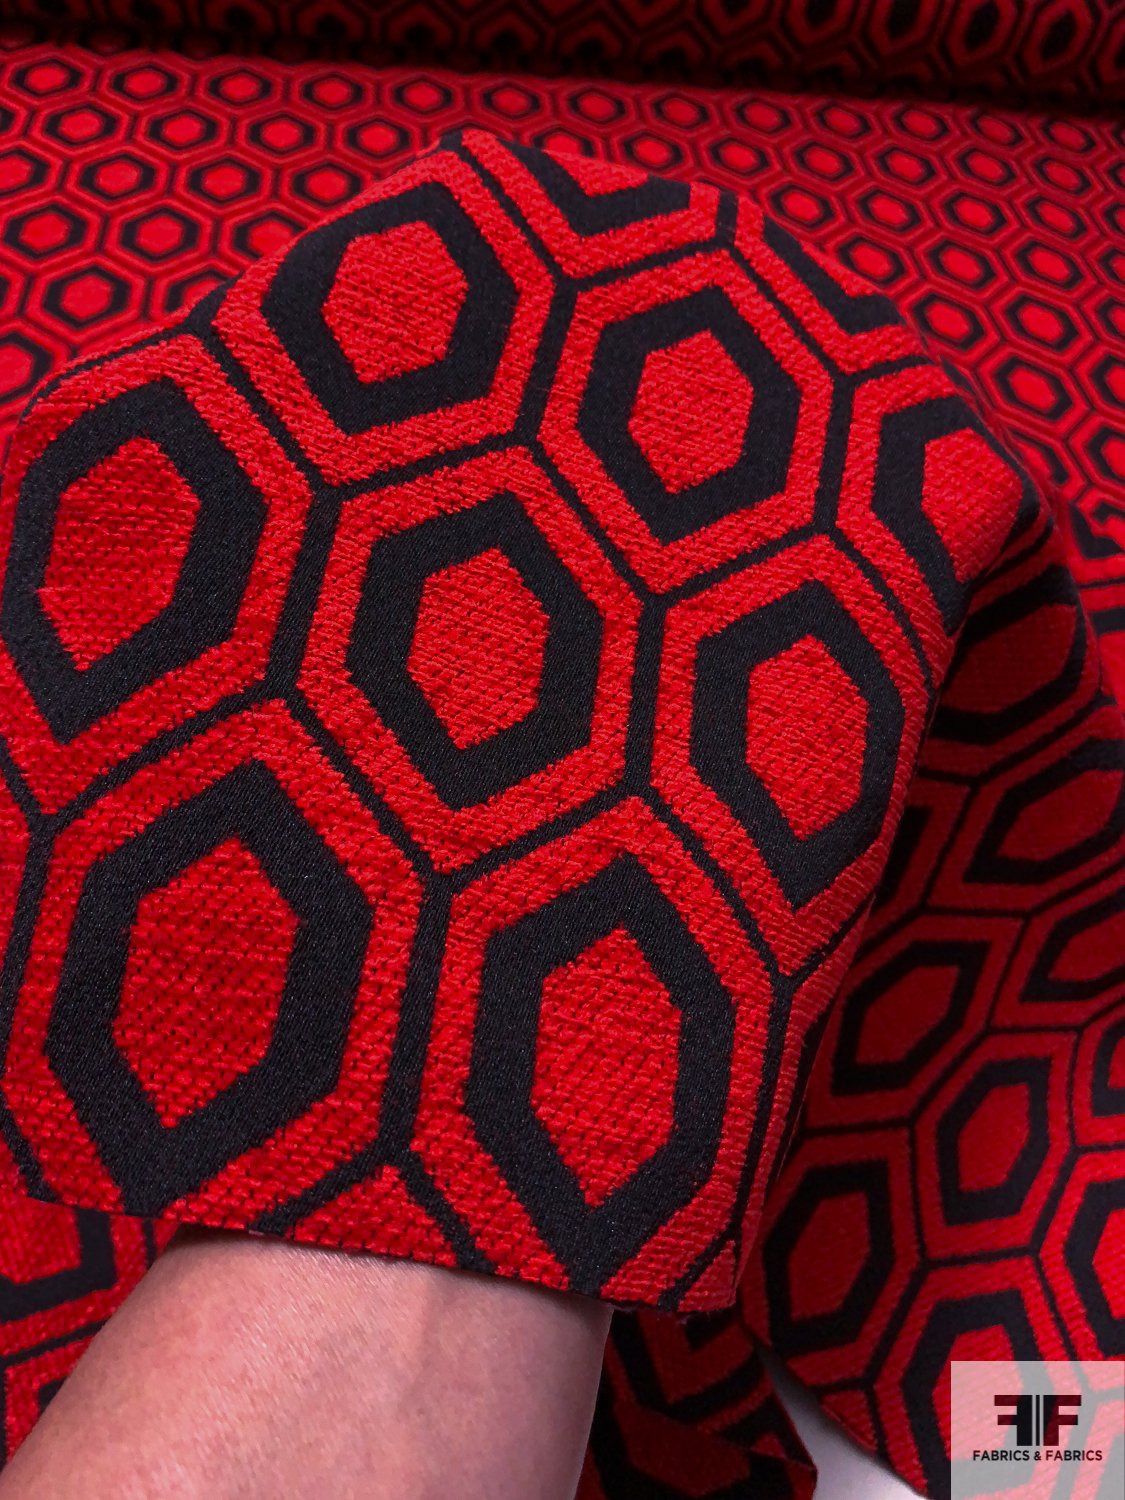 Italian Novelty Chenille Hexagon Jacket Weight Suiting - Bright Red / Black